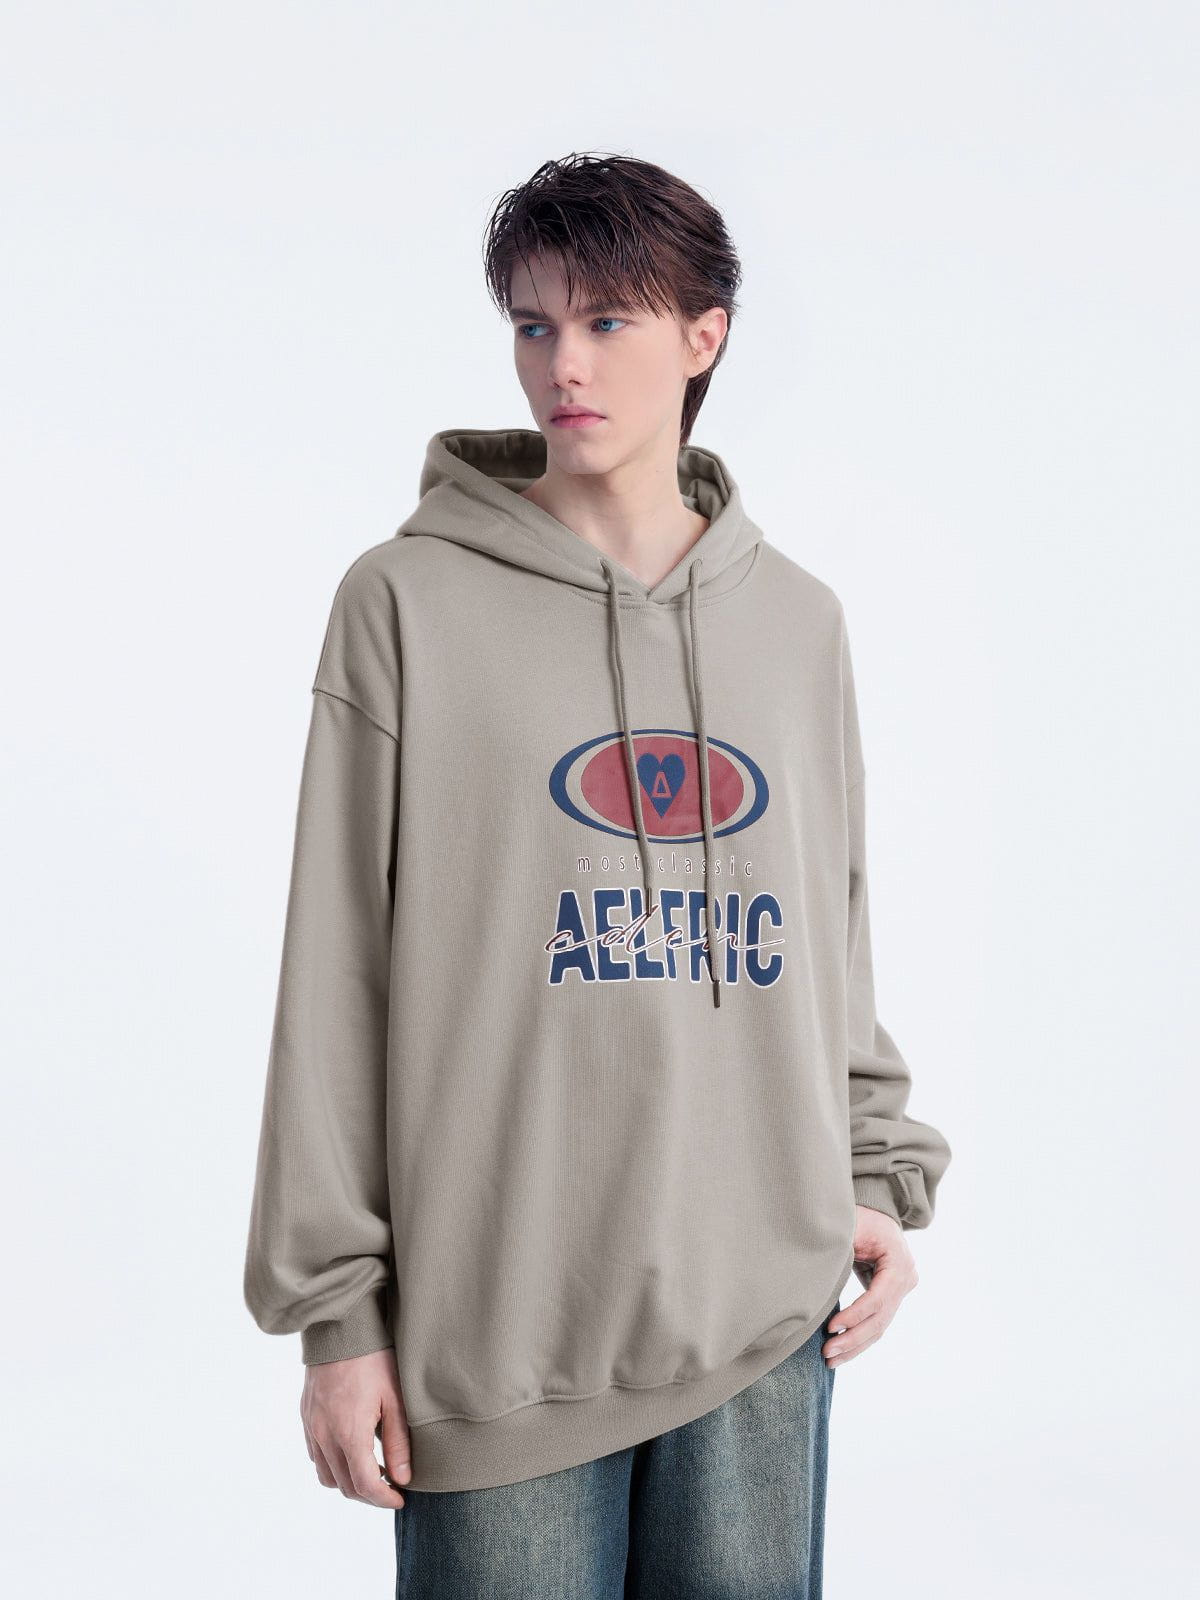 Aelfric Eden Simple Letter Print Hoodie [Recommended by @theconnelltwinsreal]